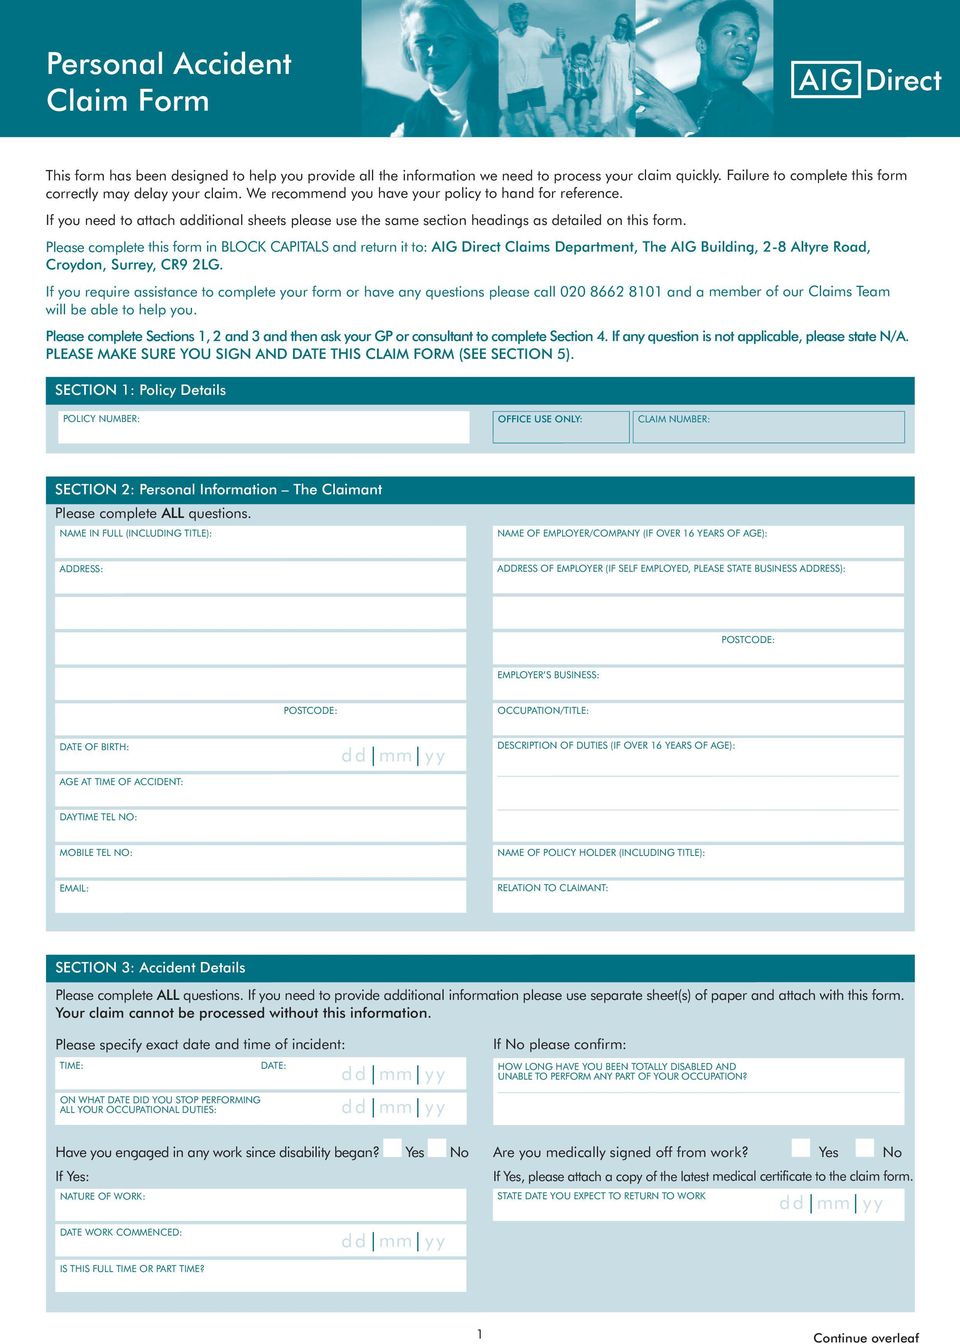 Please complete this form in BLOCK CAPITALS and return it to: AIG Direct Claims Department, The AIG Building, 2-8 Altyre Road, Croydon, Surrey, CR9 2LG.